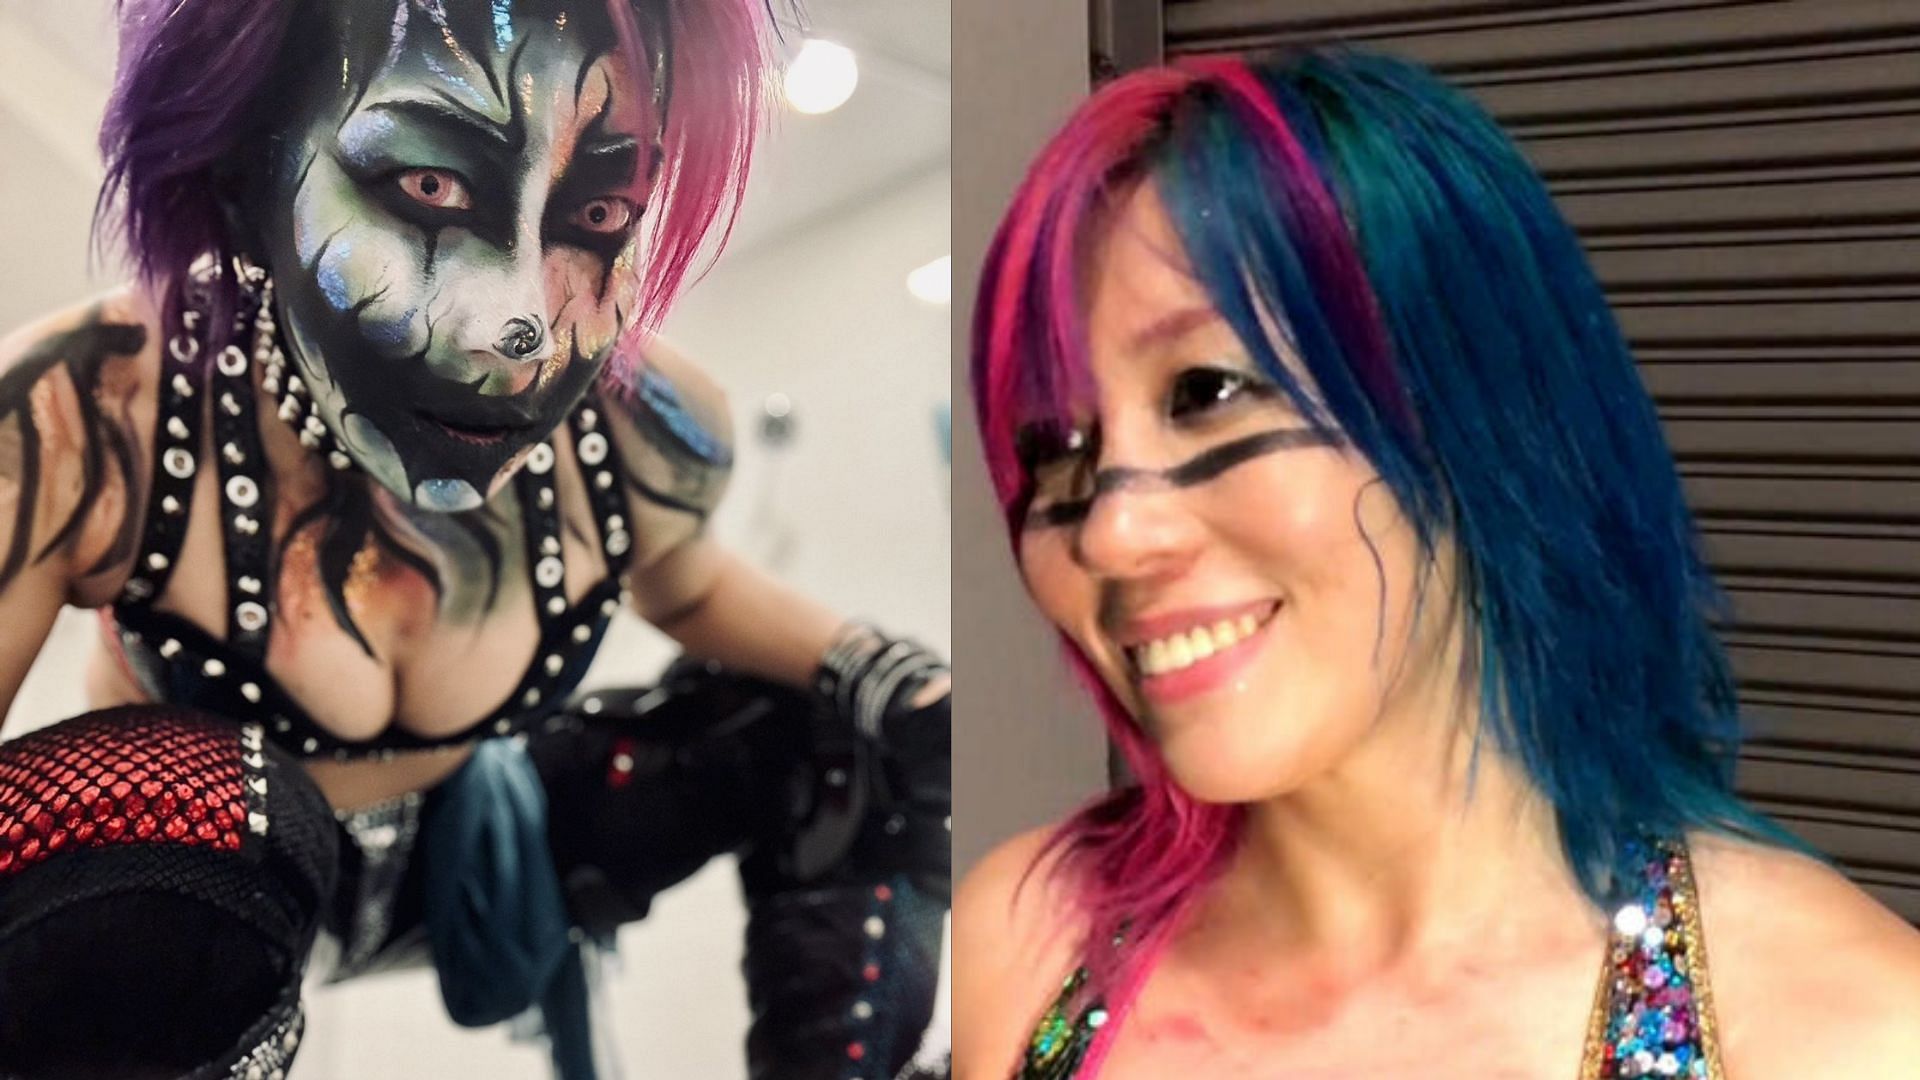 Asuka has now sent a message to her fans